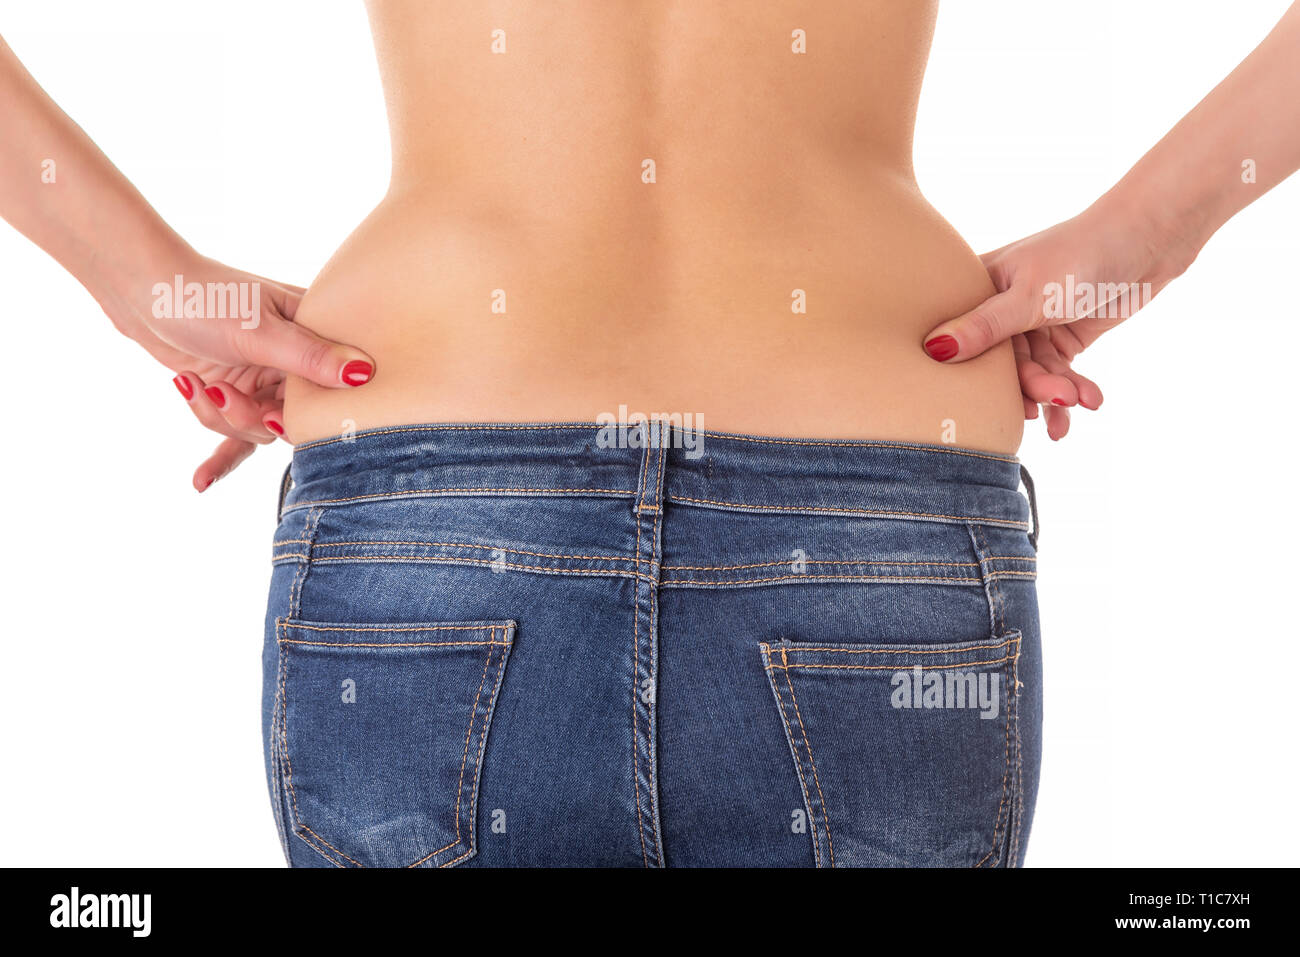 Woman measuring her belly fat with her hands. Stock Photo